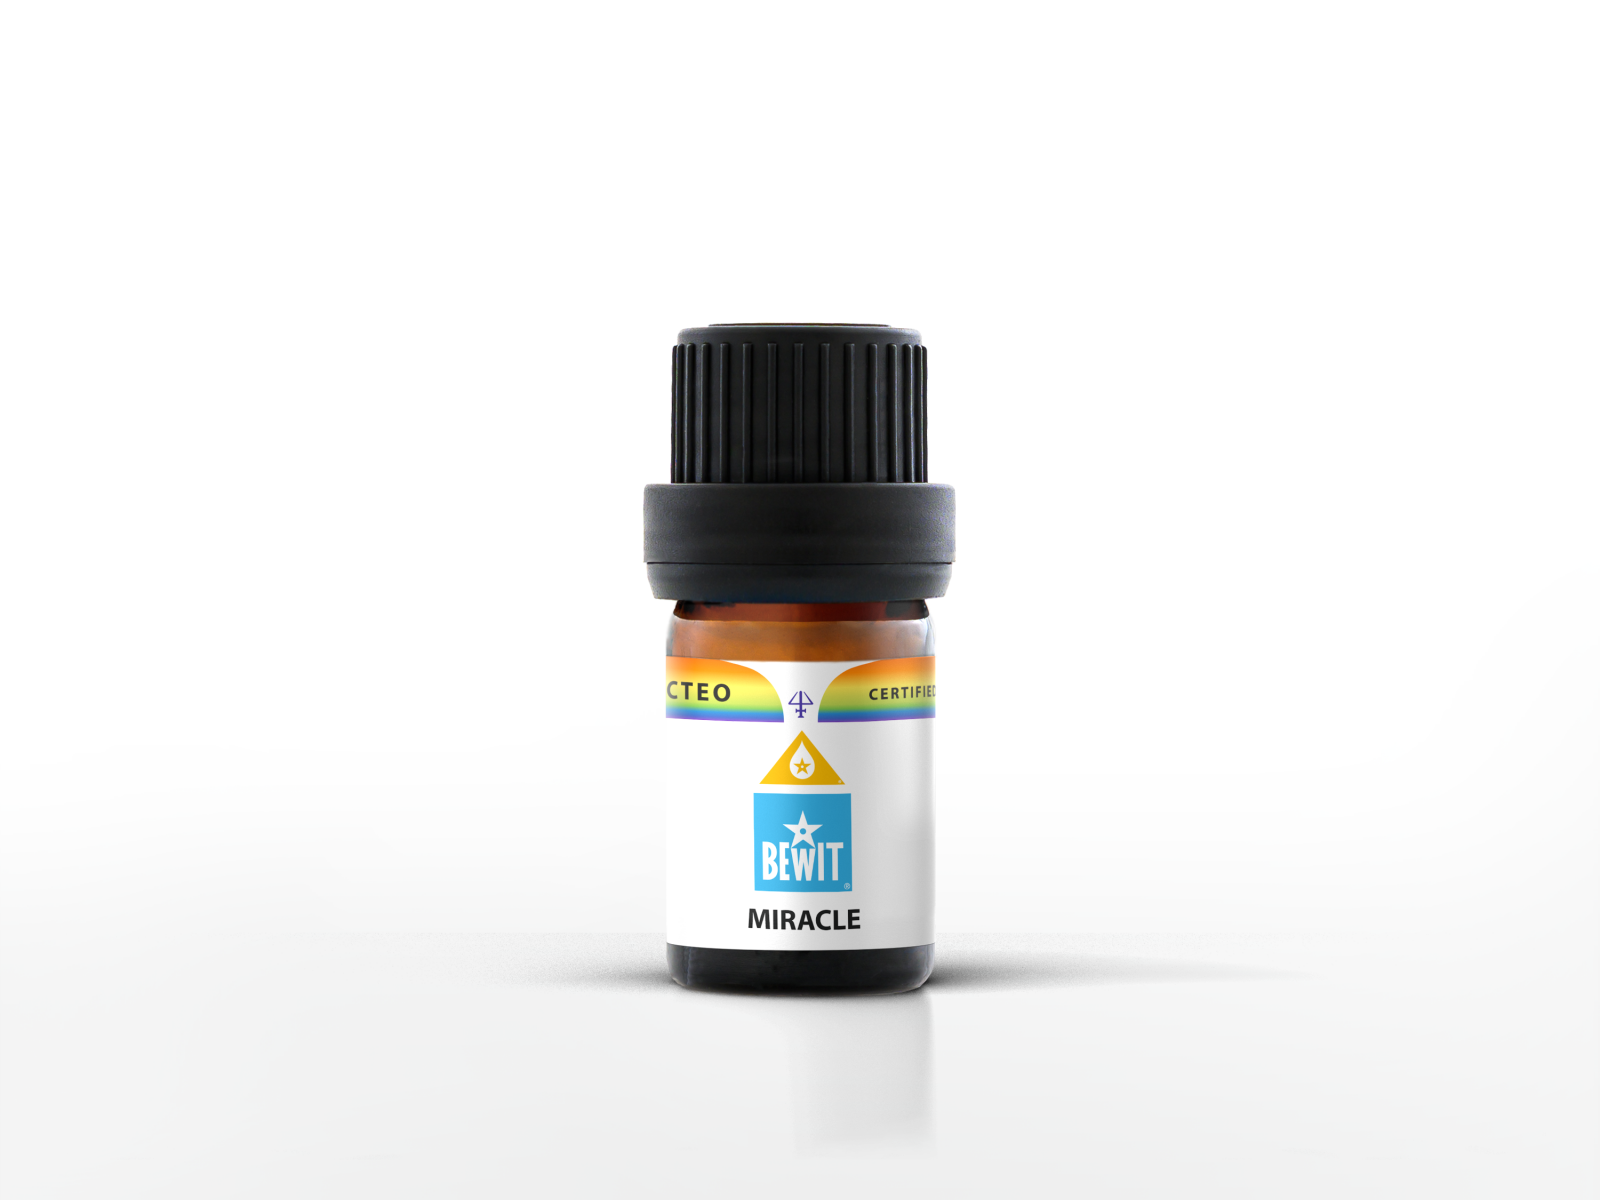 BEWIT MIRACLE - A unique blend of the essential oils - 2